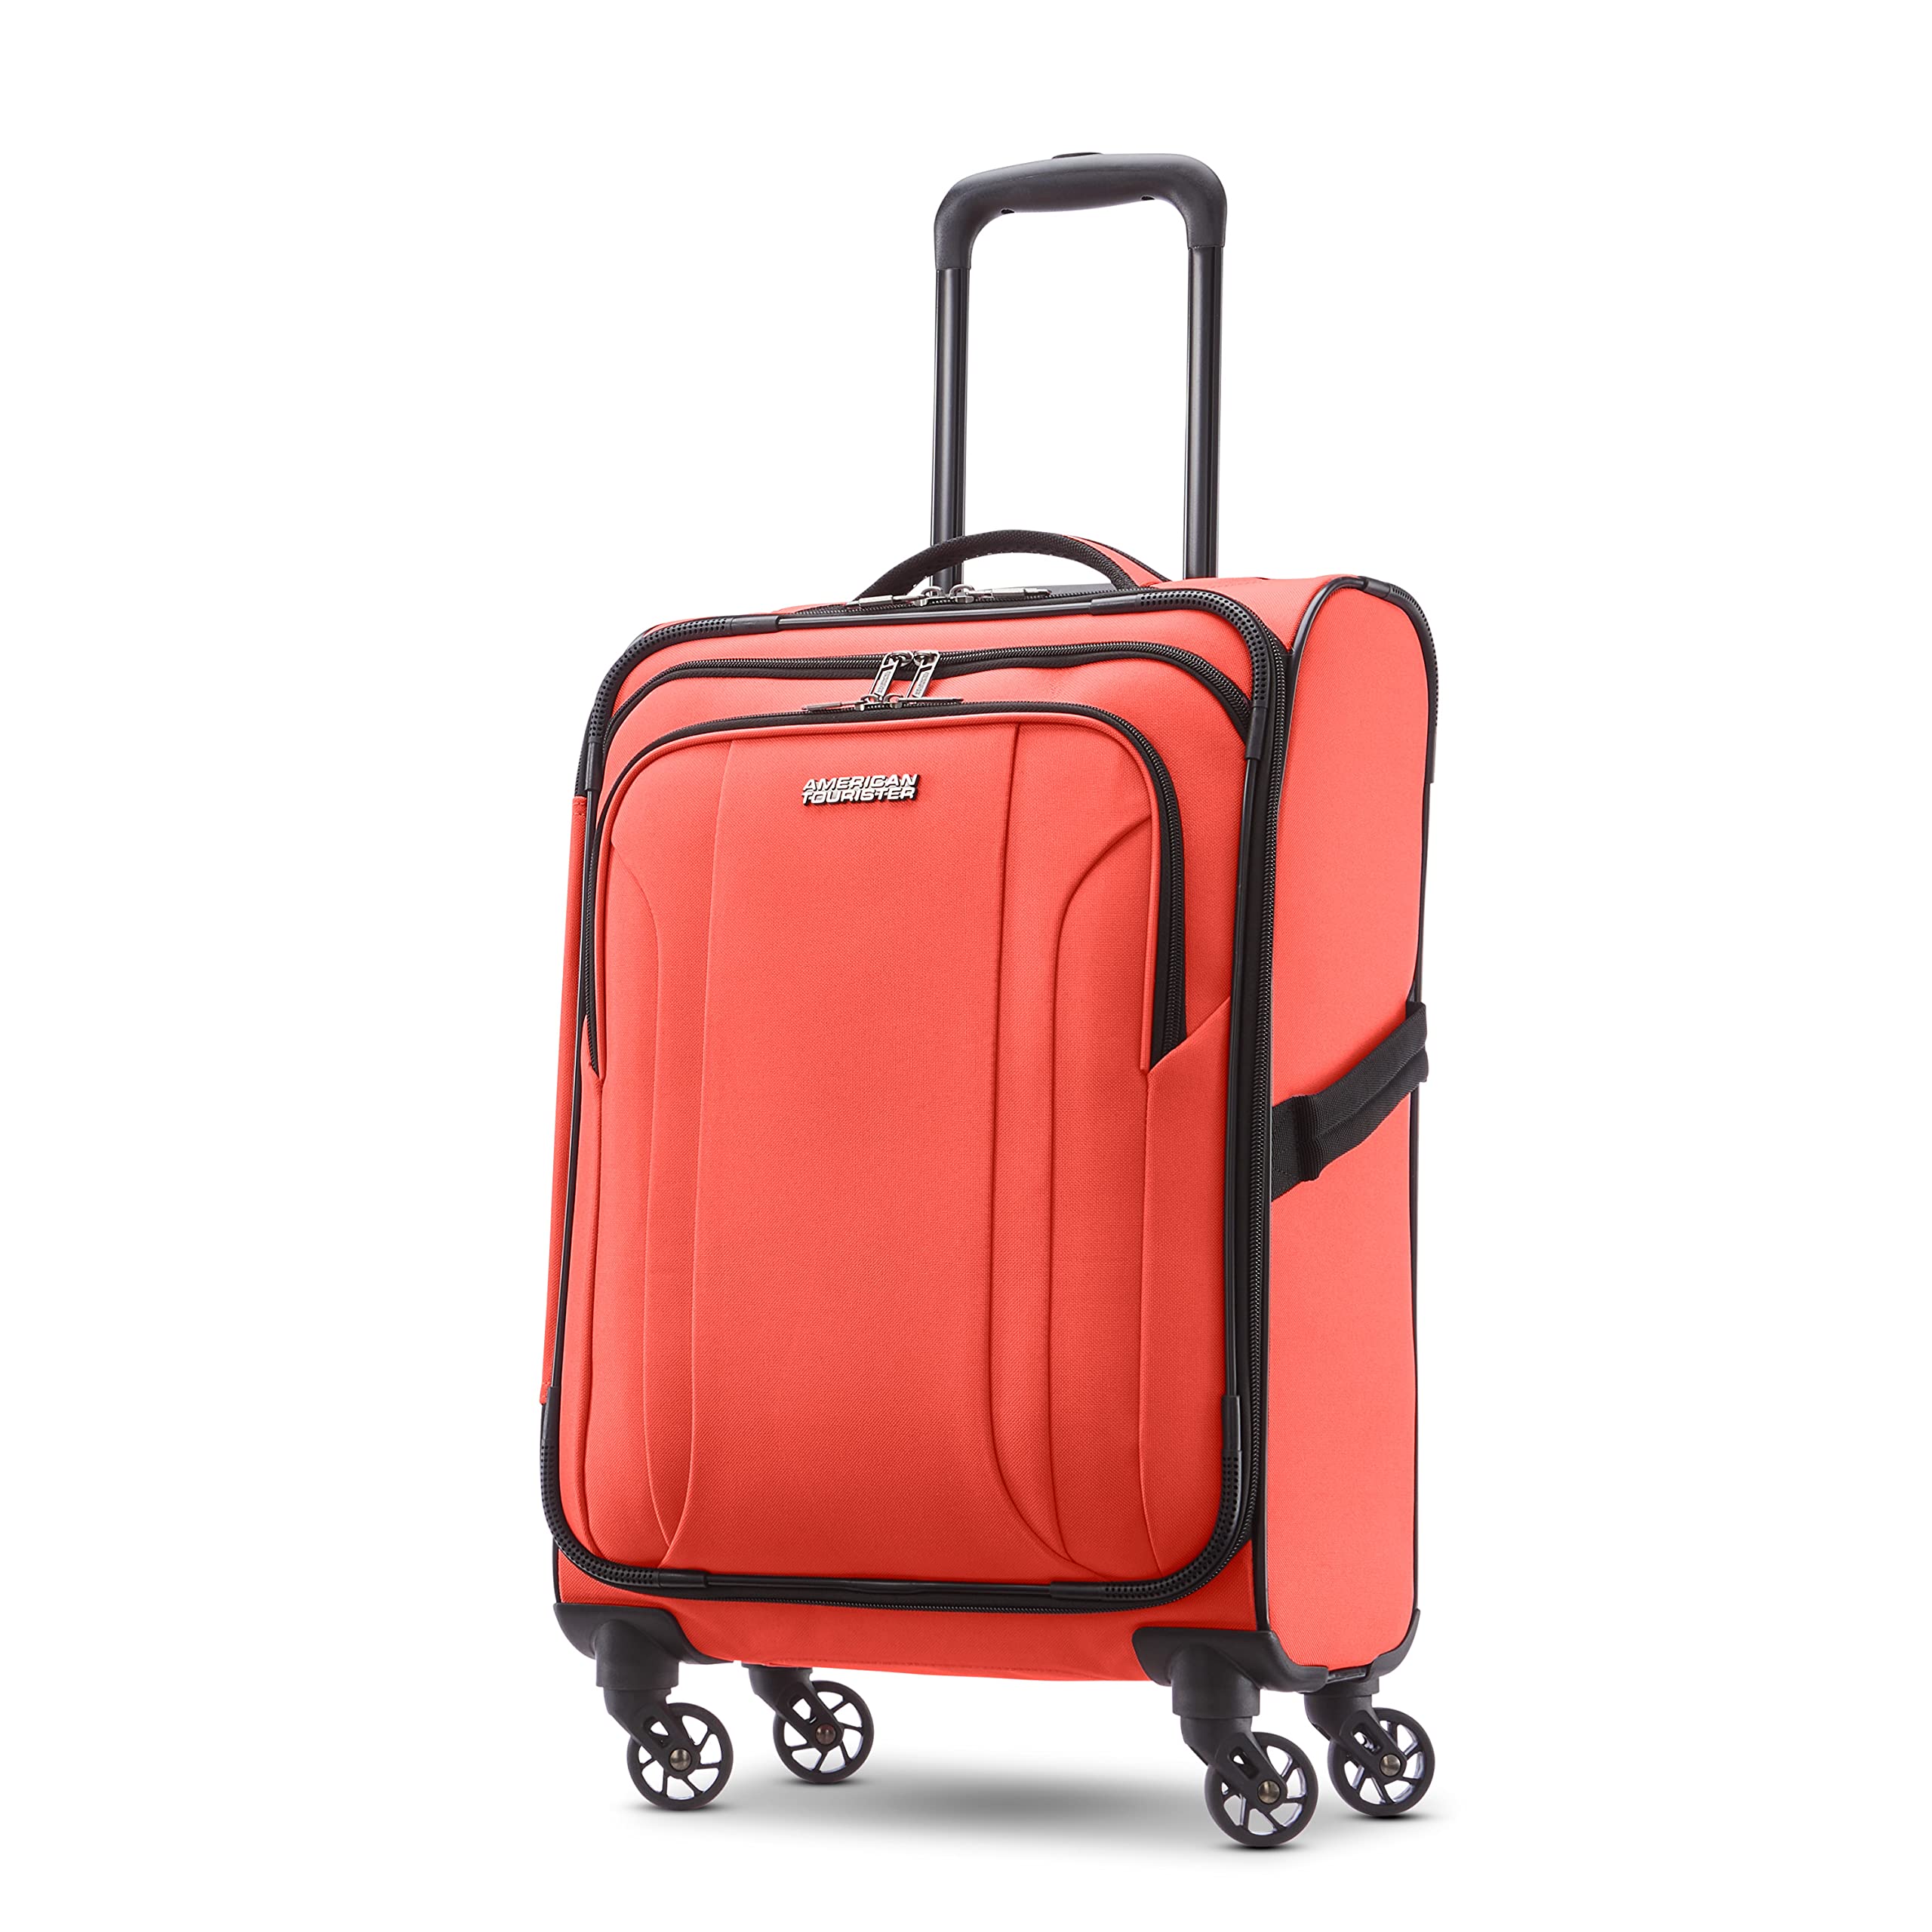 American Tourister 4 Piece Softside Luggage Set, Red 